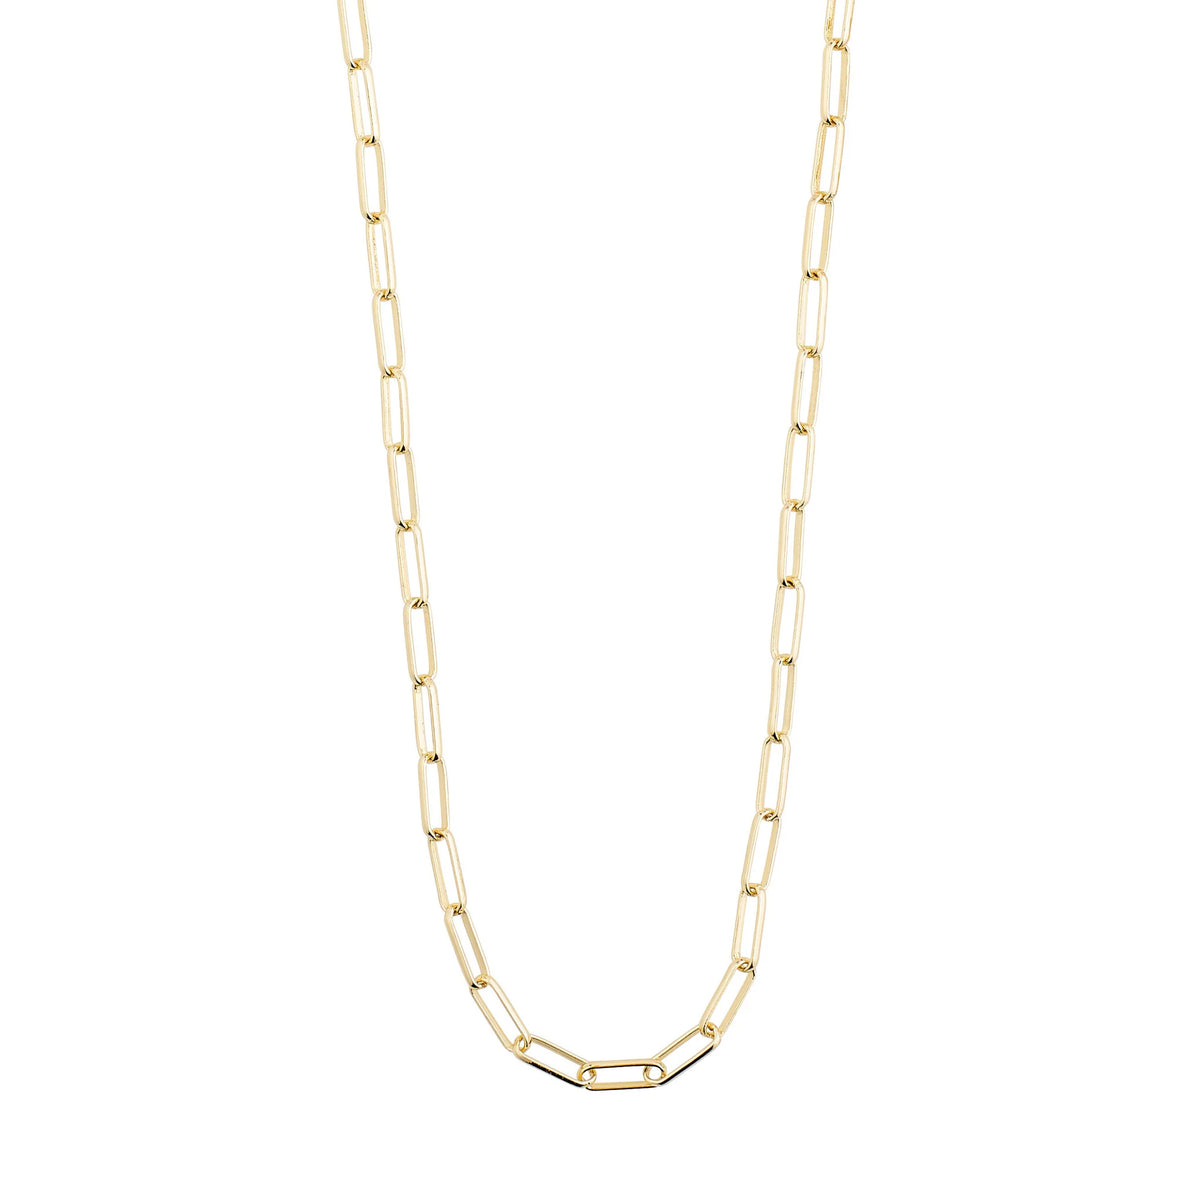 Pilgrim Ronja Gold Plated Necklace